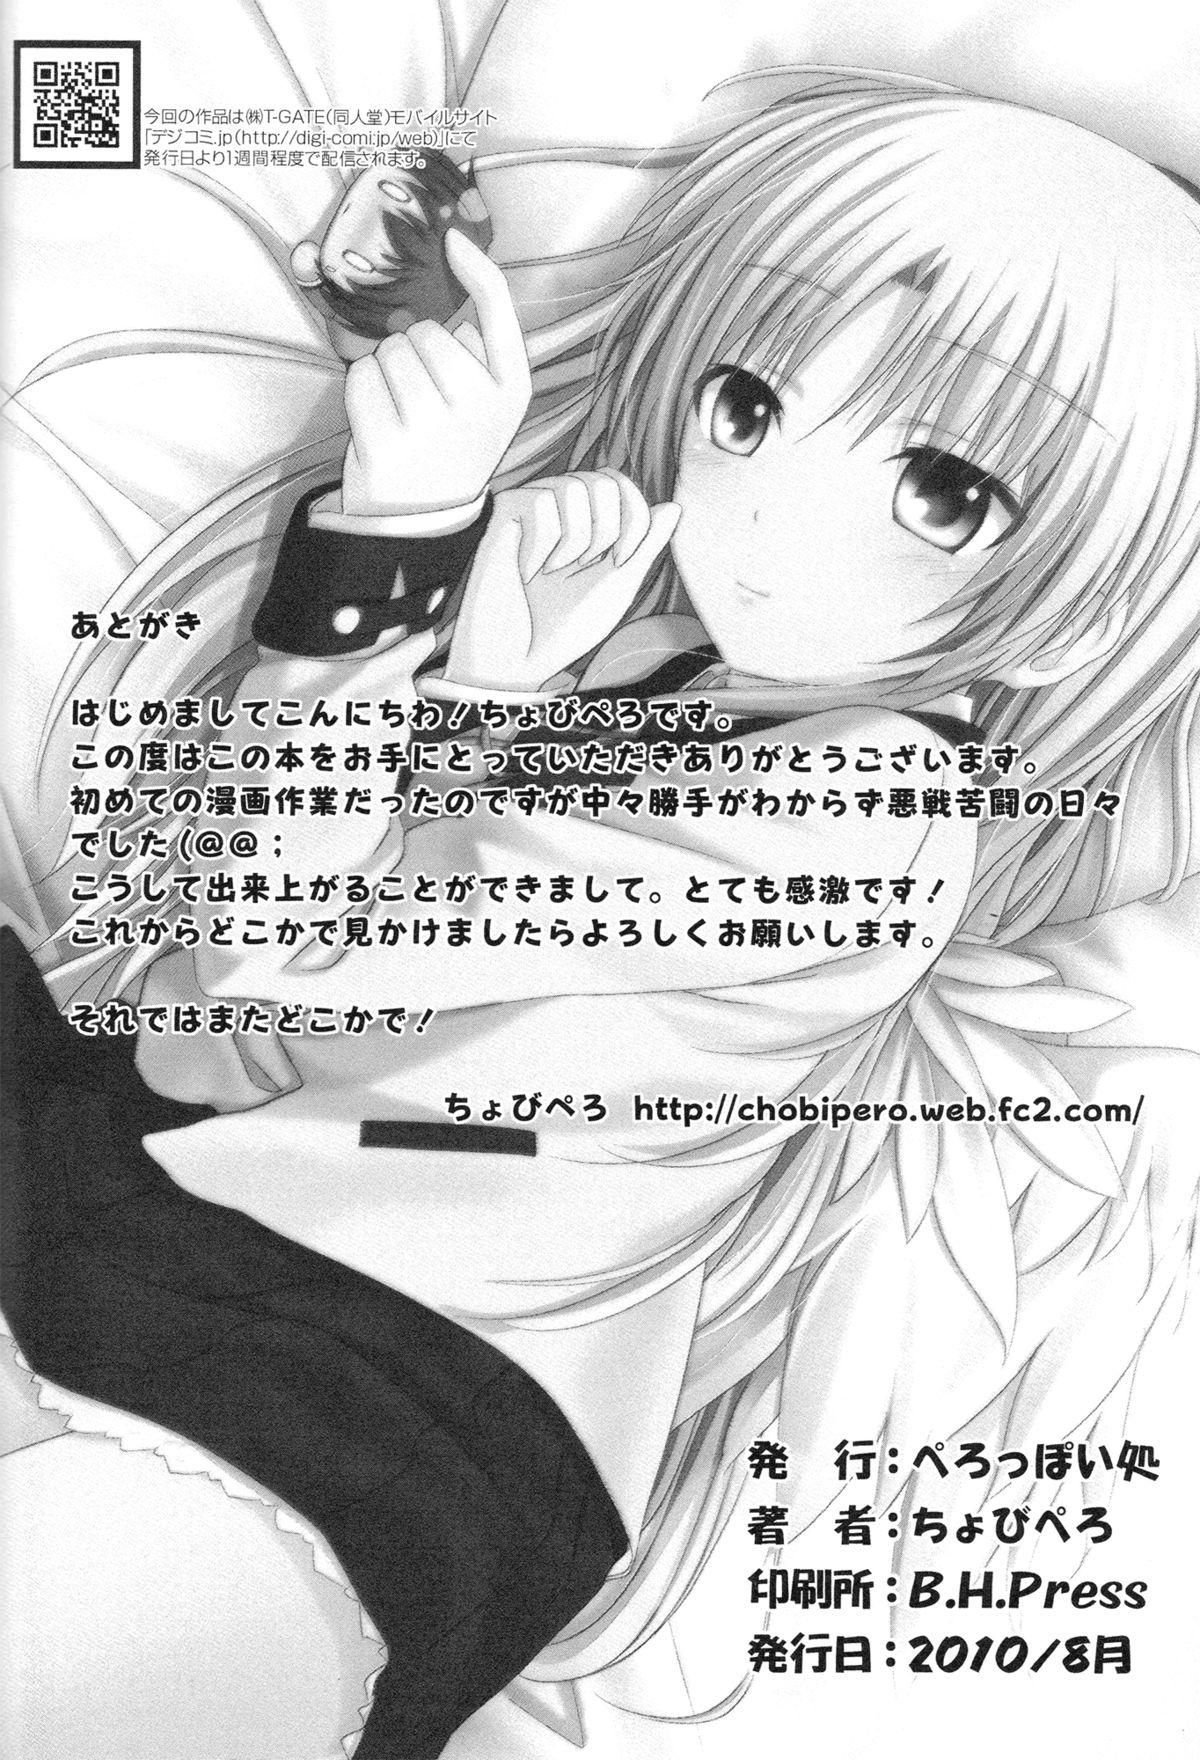 Adorable Tenshi no Oto! - Angel beats Webcamchat - Page 25